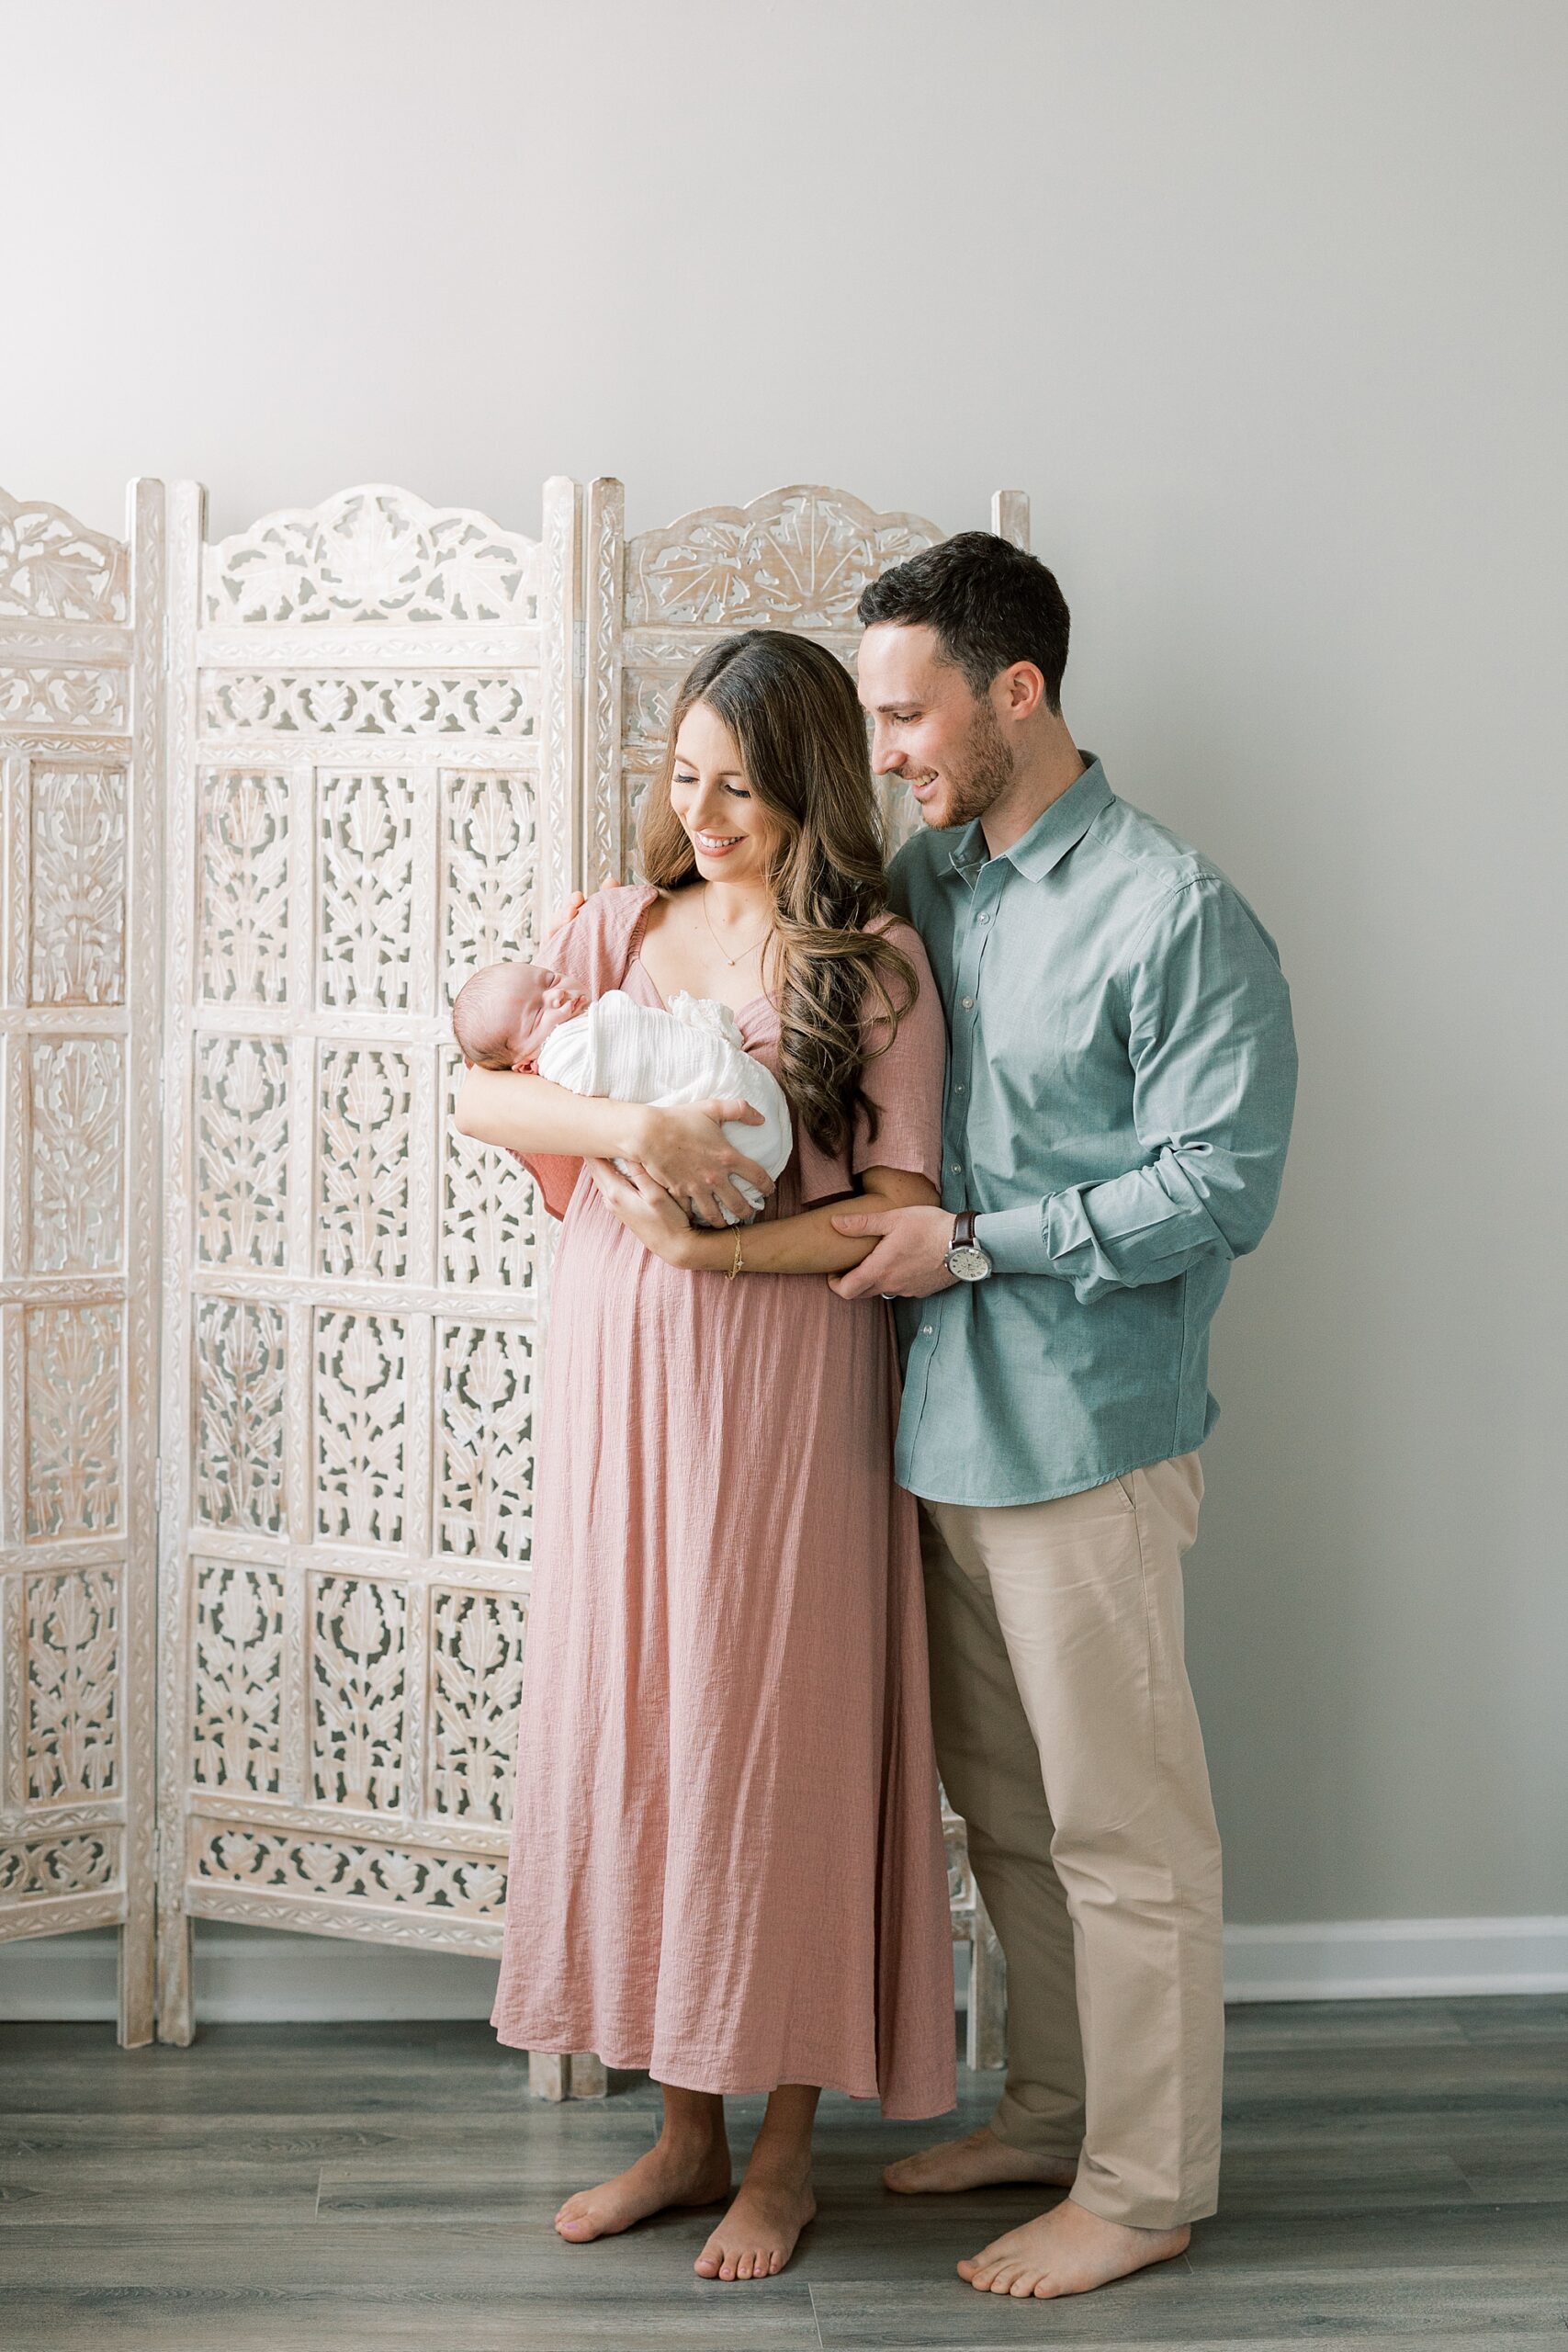 new parents hug baby girl by room divider during studio newborn session in Philadelphia PA